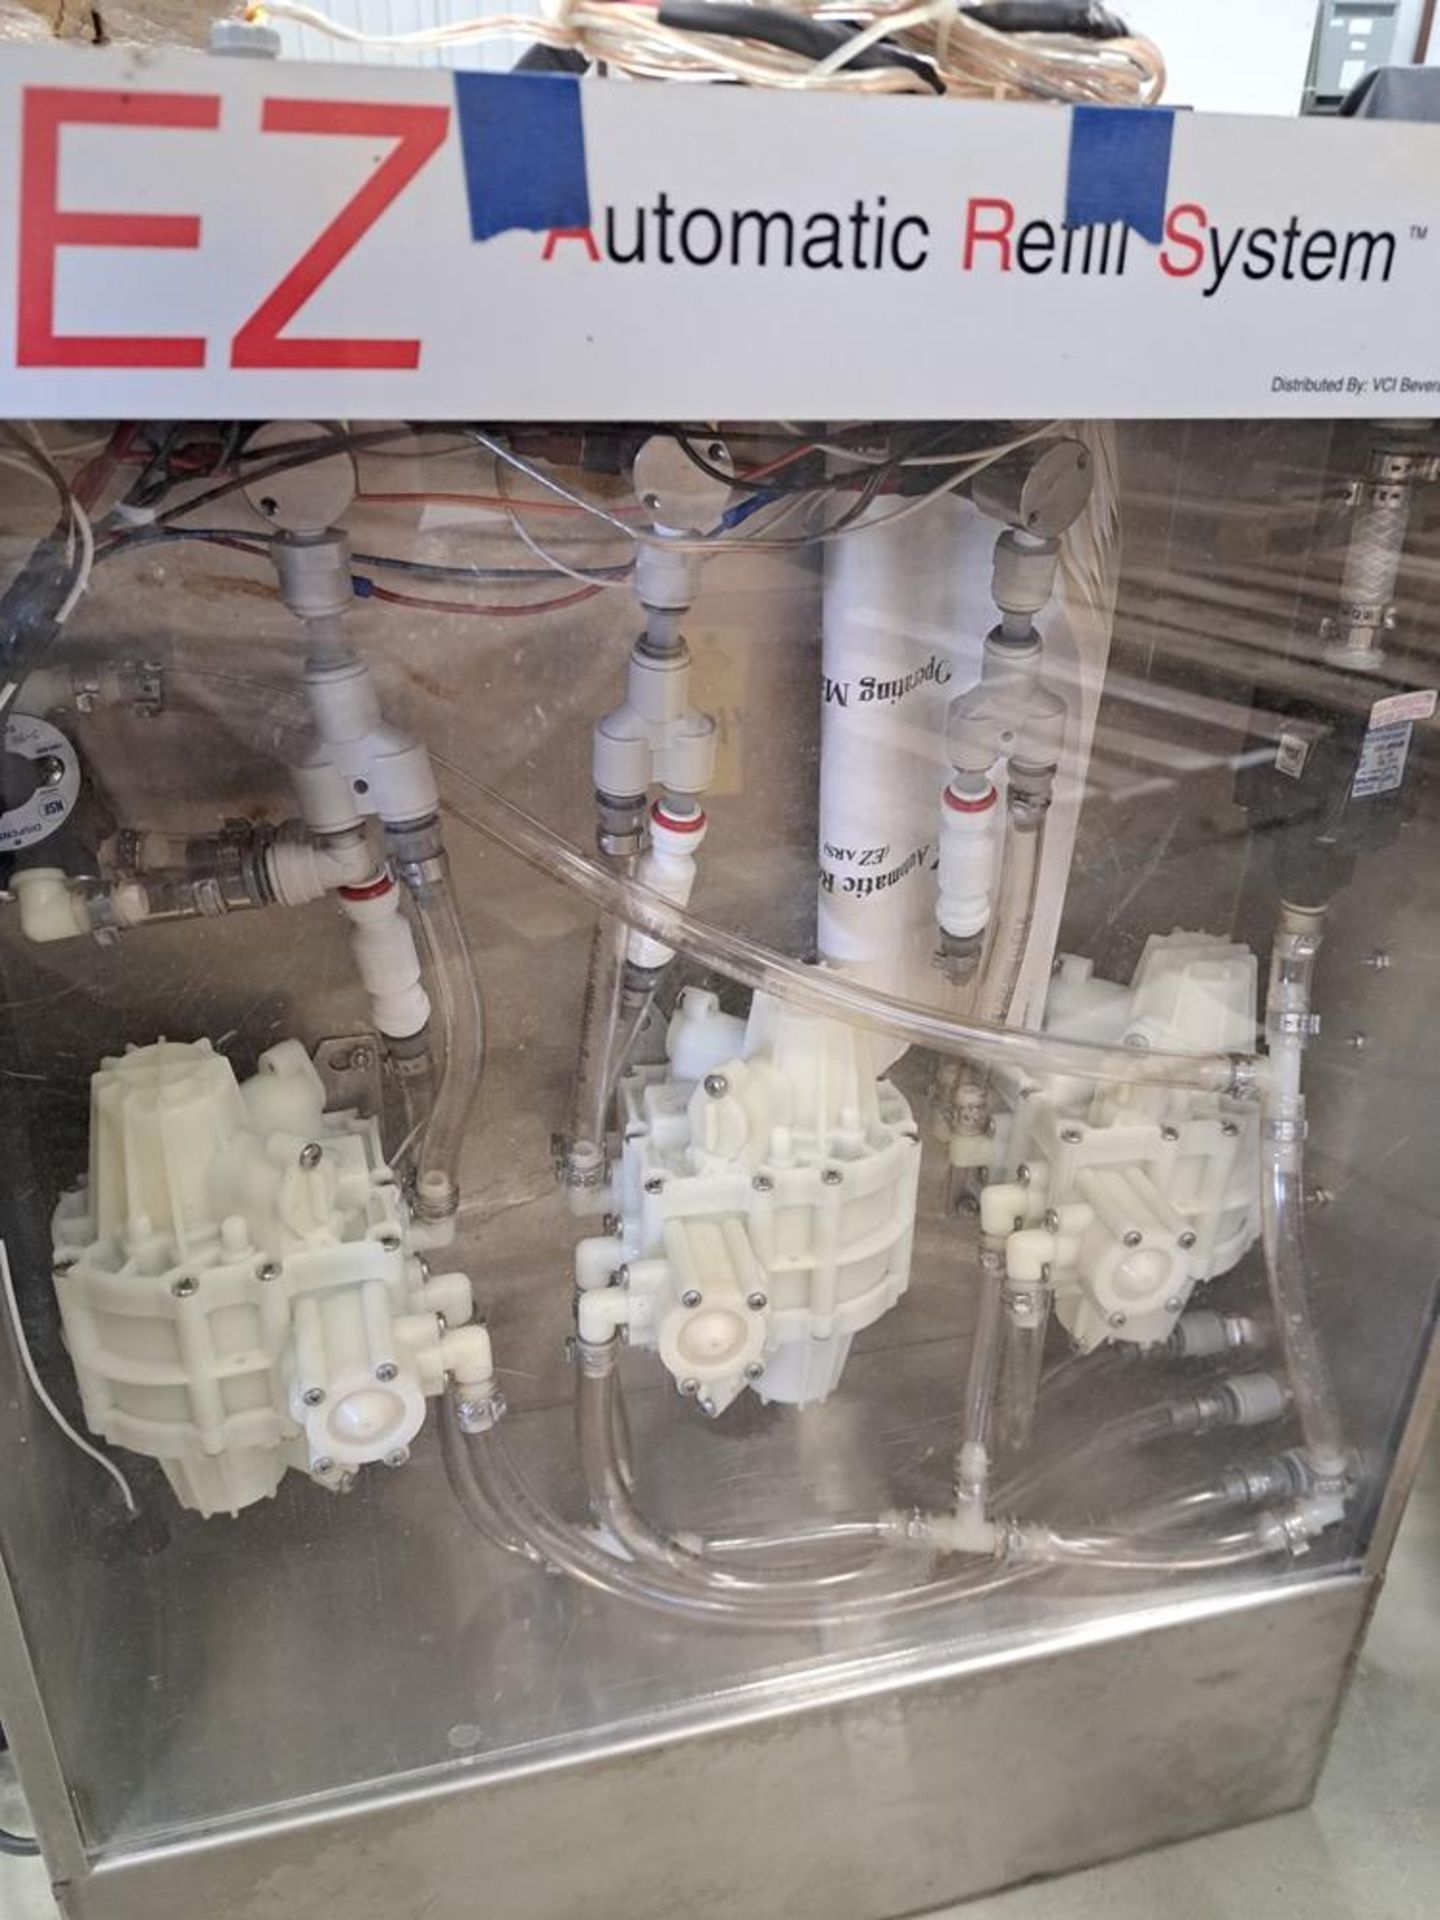 EZ Mdl. EZ3ARS 3-Vessel Automatic Refill System, Ser. #31018, 110 volts (Required Loading Fee: $15. - Image 5 of 6